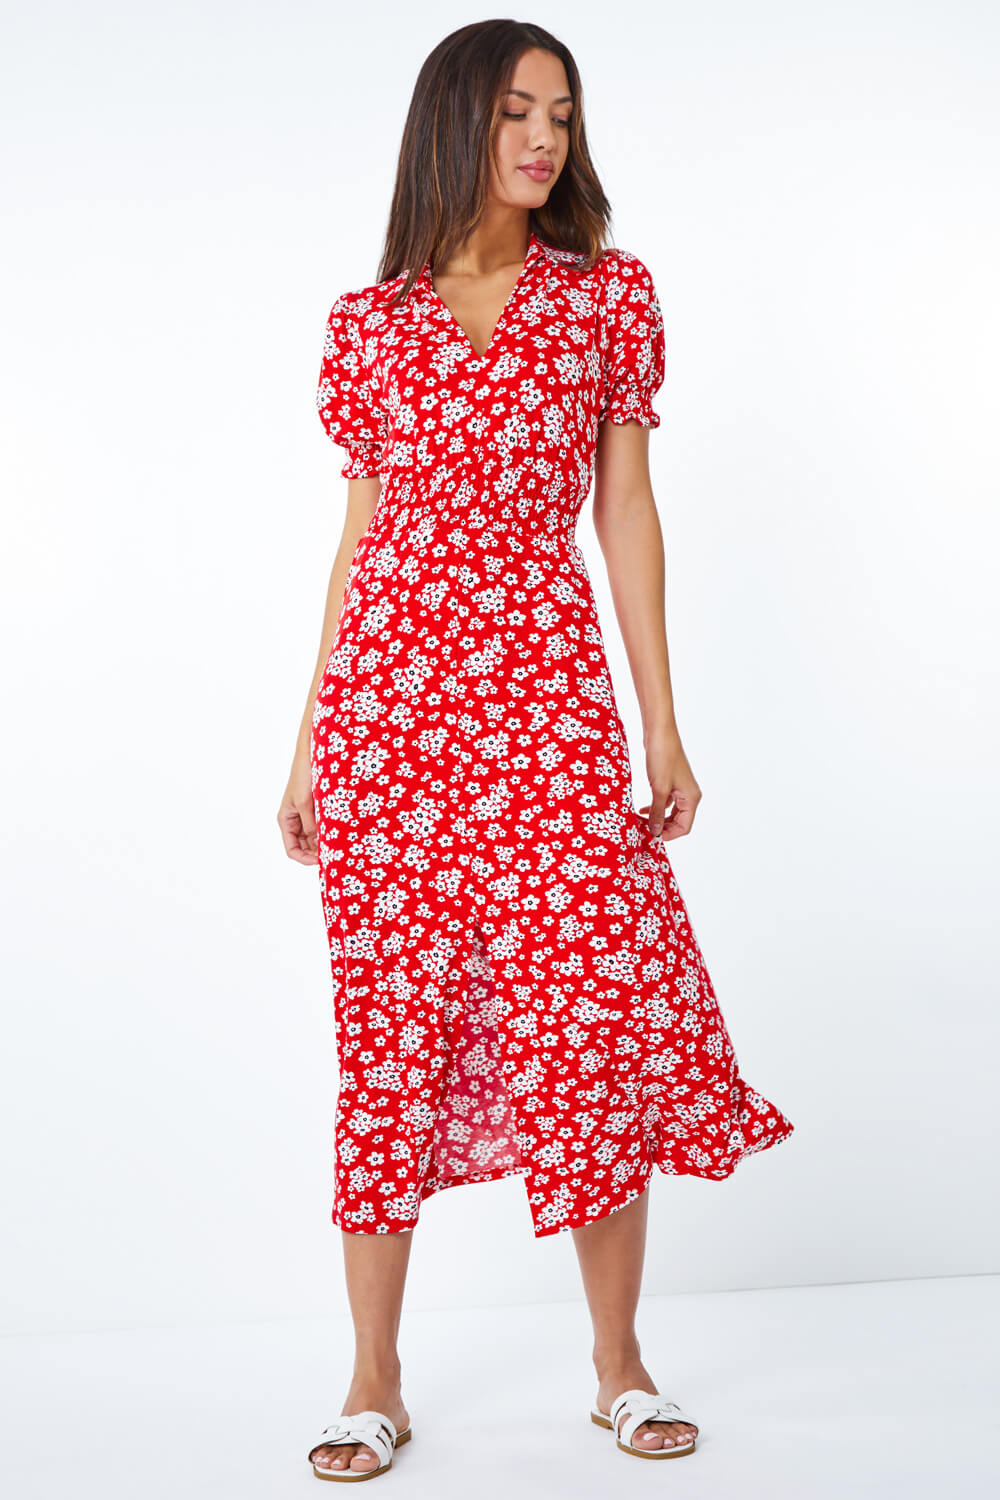 Red Ditsy Floral Print Fit & Flare Dress, Image 2 of 5